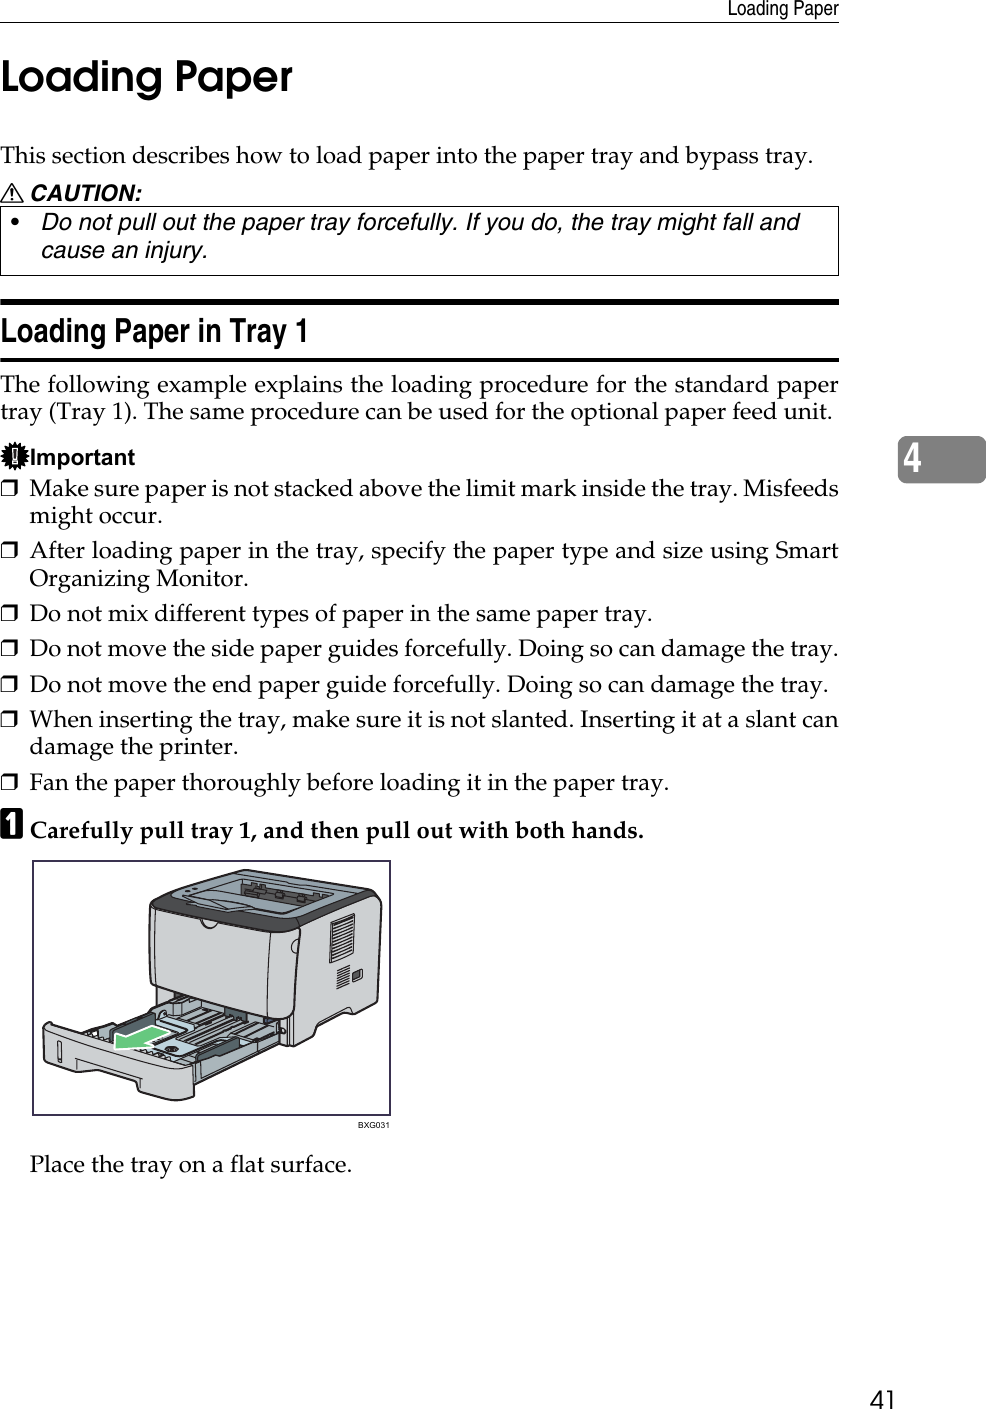 Loading Paper414Loading PaperThis section describes how to load paper into the paper tray and bypass tray.R CAUTION:Loading Paper in Tray 1The following example explains the loading procedure for the standard papertray (Tray 1). The same procedure can be used for the optional paper feed unit. Important❒Make sure paper is not stacked above the limit mark inside the tray. Misfeedsmight occur.❒After loading paper in the tray, specify the paper type and size using SmartOrganizing Monitor.❒Do not mix different types of paper in the same paper tray.❒Do not move the side paper guides forcefully. Doing so can damage the tray.❒Do not move the end paper guide forcefully. Doing so can damage the tray.❒When inserting the tray, make sure it is not slanted. Inserting it at a slant candamage the printer.❒Fan the paper thoroughly before loading it in the paper tray.ACarefully pull tray 1, and then pull out with both hands.Place the tray on a flat surface.•Do not pull out the paper tray forcefully. If you do, the tray might fall and cause an injury.BXG031